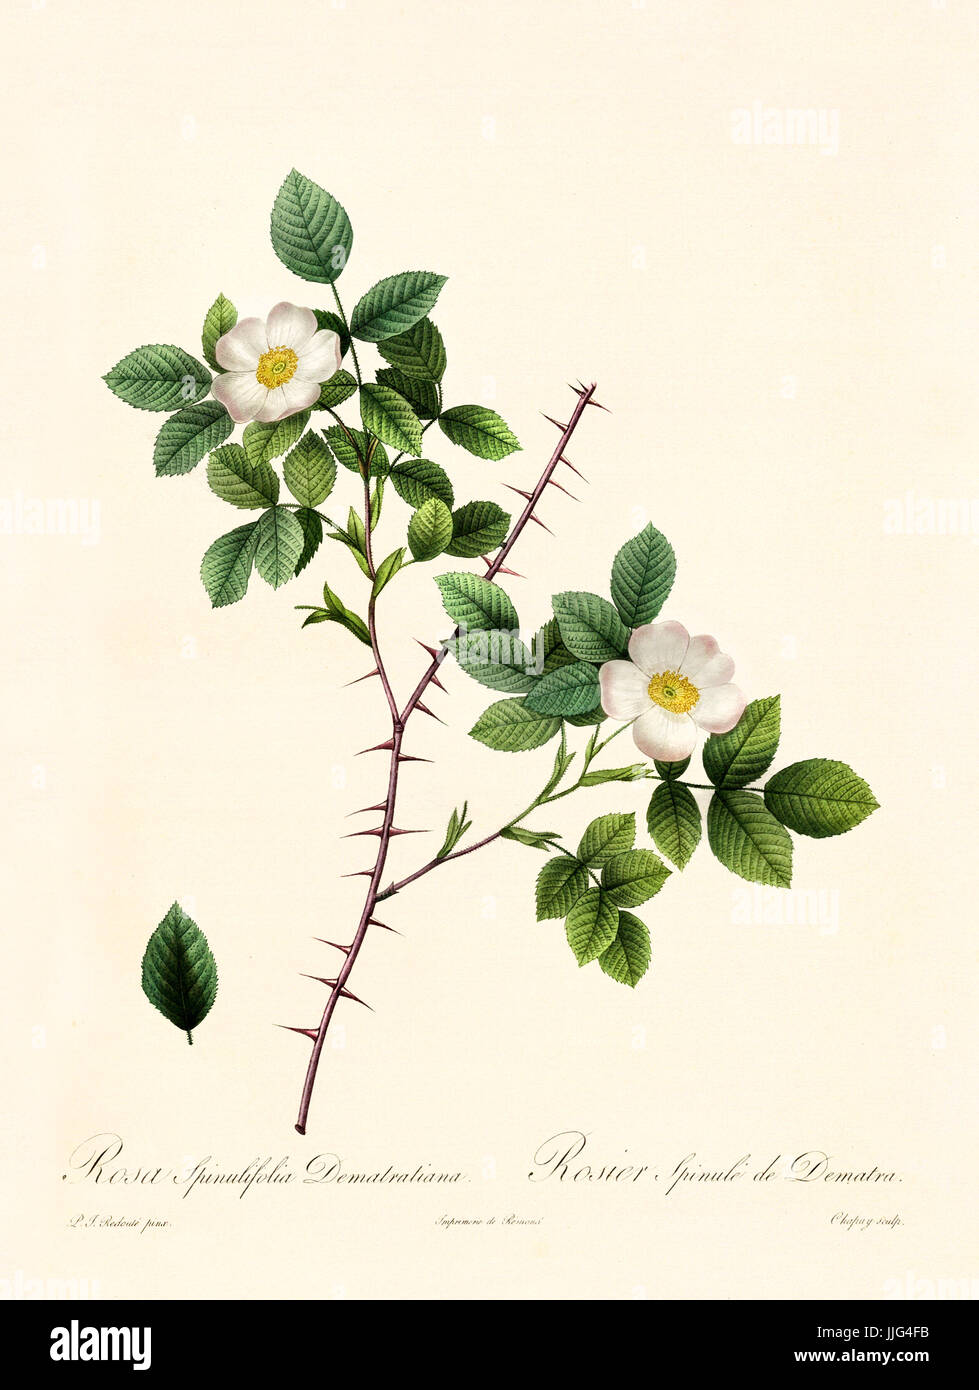 Old illustration of Rosa spinulifolia dematratiana. Created by P. R. Redoute, published on Les Roses, Imp. Firmin Didot, Paris, 1817-24 Stock Photo